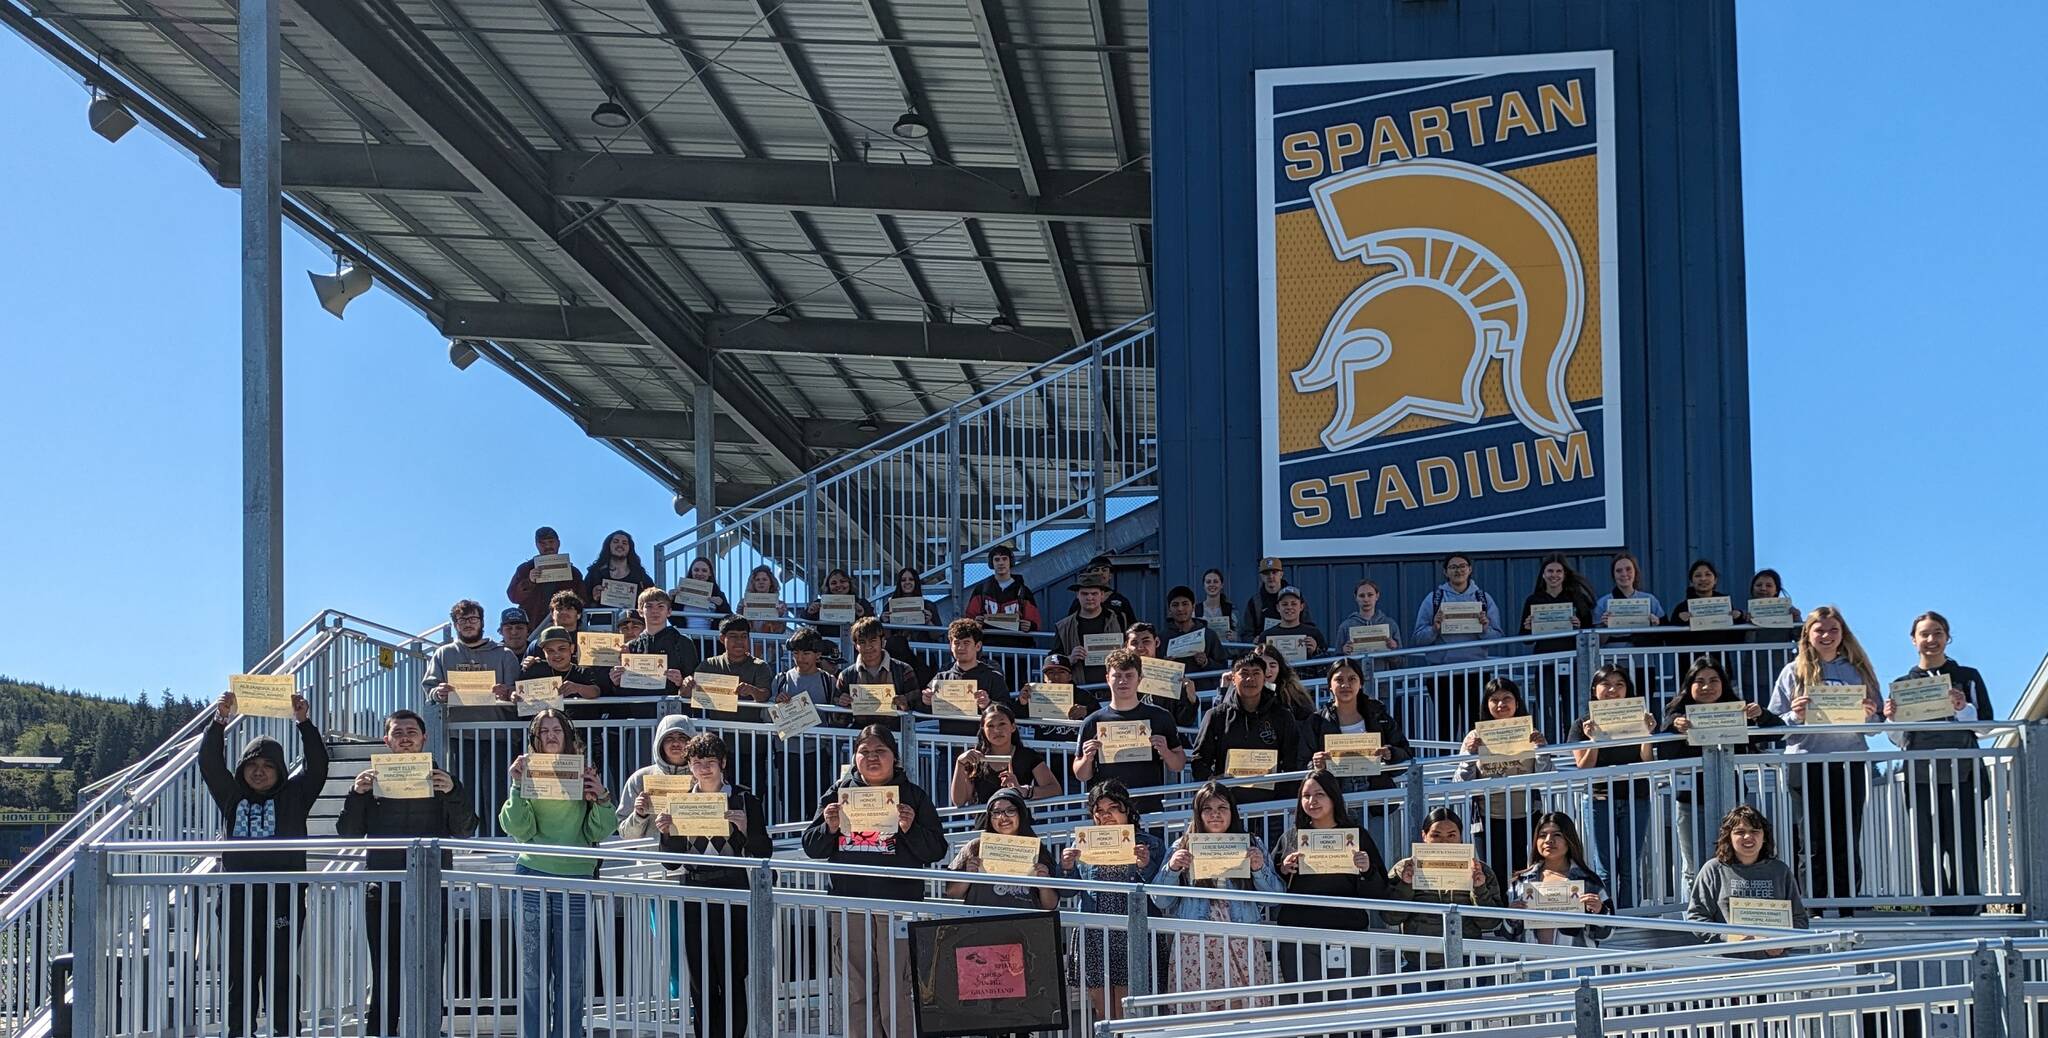 It was a beautiful day to take the Honor Roll picture at the stadium. The 98 students enjoyed the celebration and the sunshine! Submitted Photo